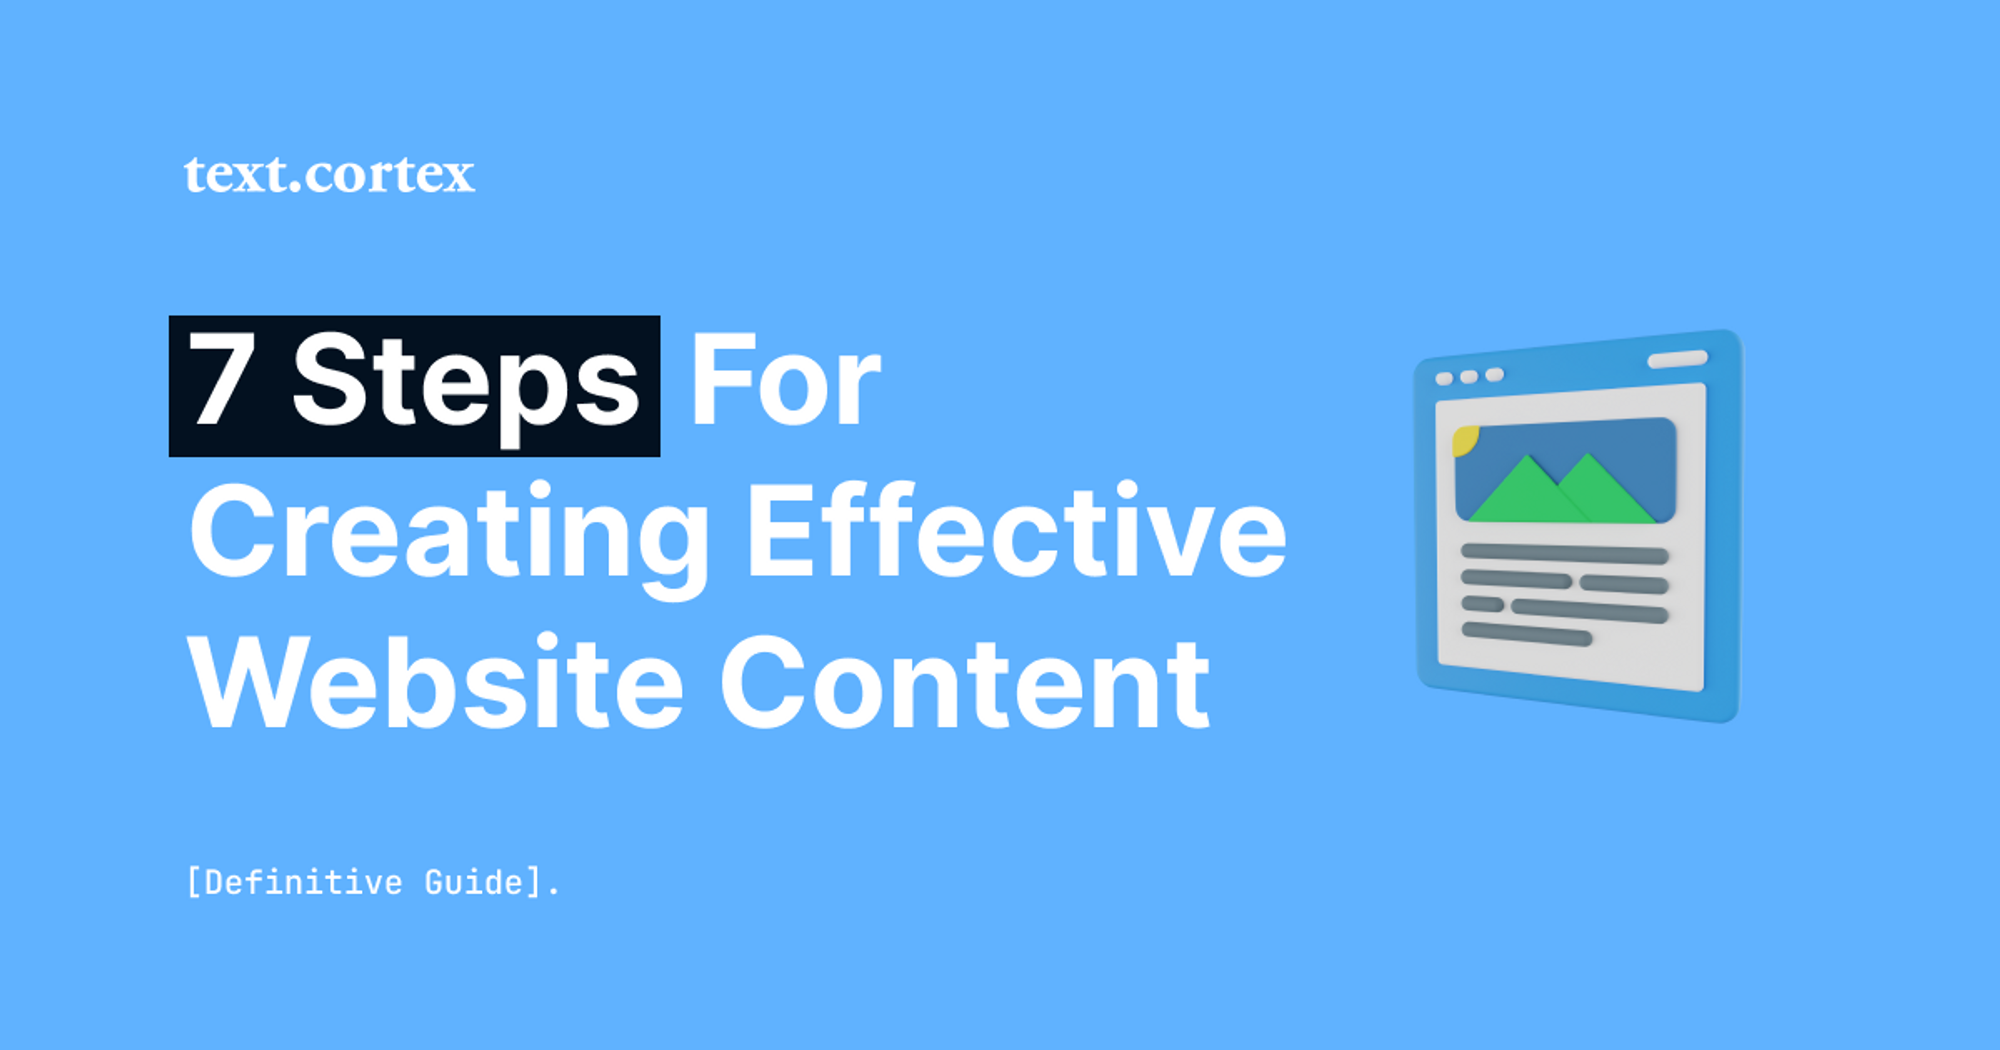 7 Steps for Creating Effective Website Content [Definitive Guide]